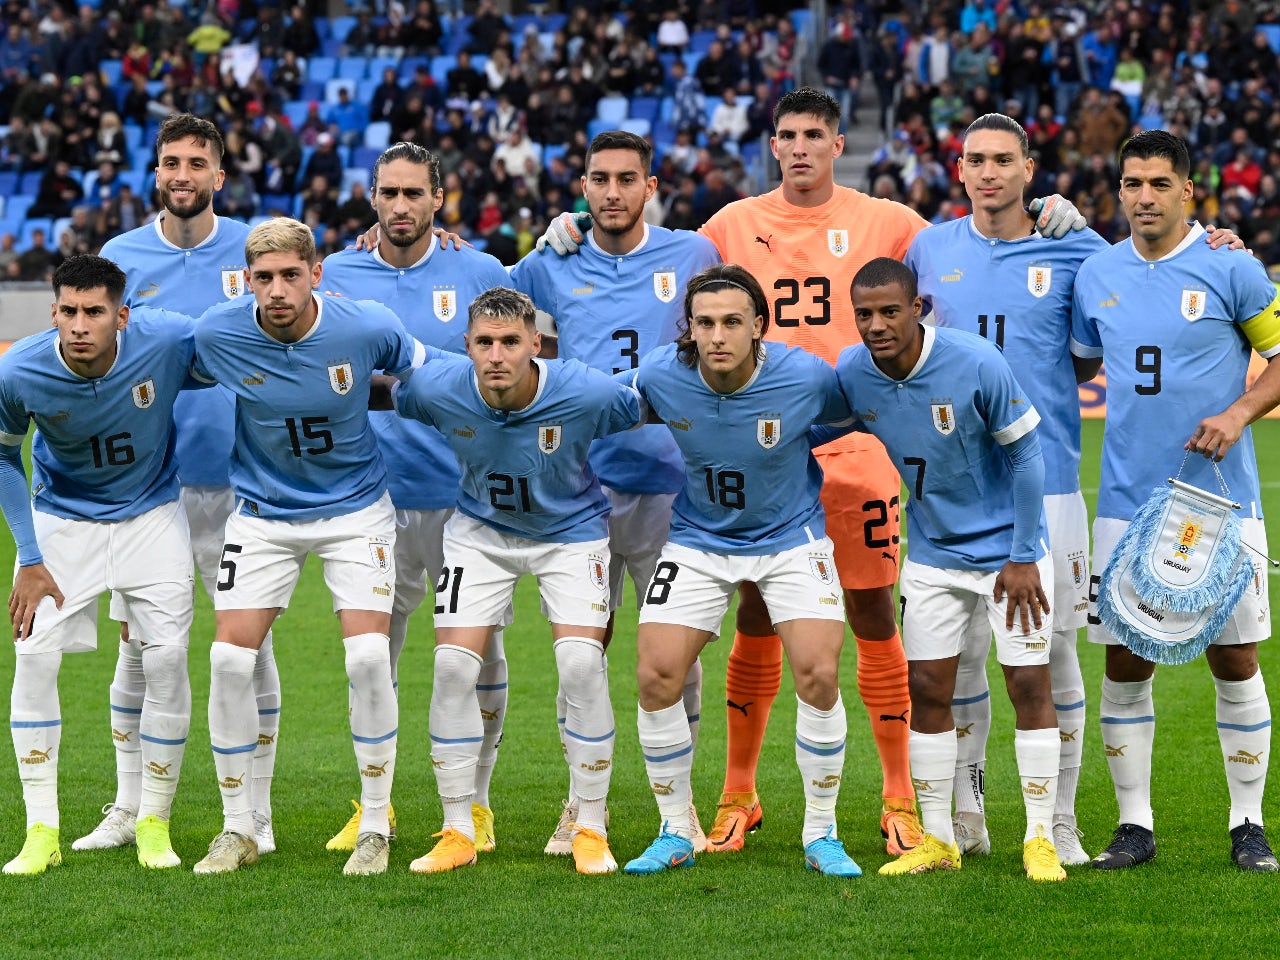 Uruguay World Cup 2022 preview - prediction, fixtures, squad, star player - Sports Mole